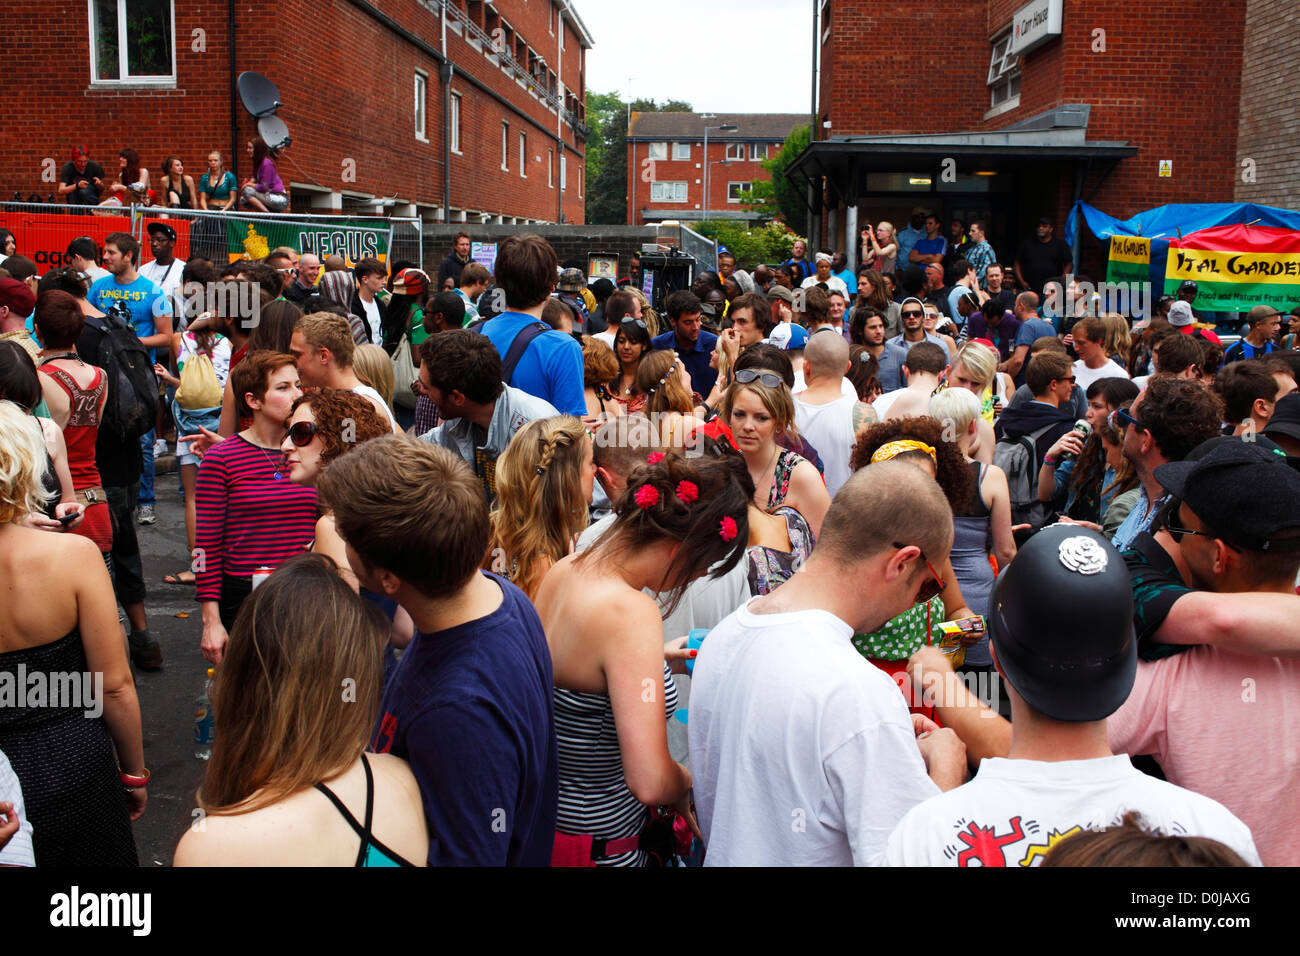 People partying at St Paul's Carnival in Bristol. Stock Photo